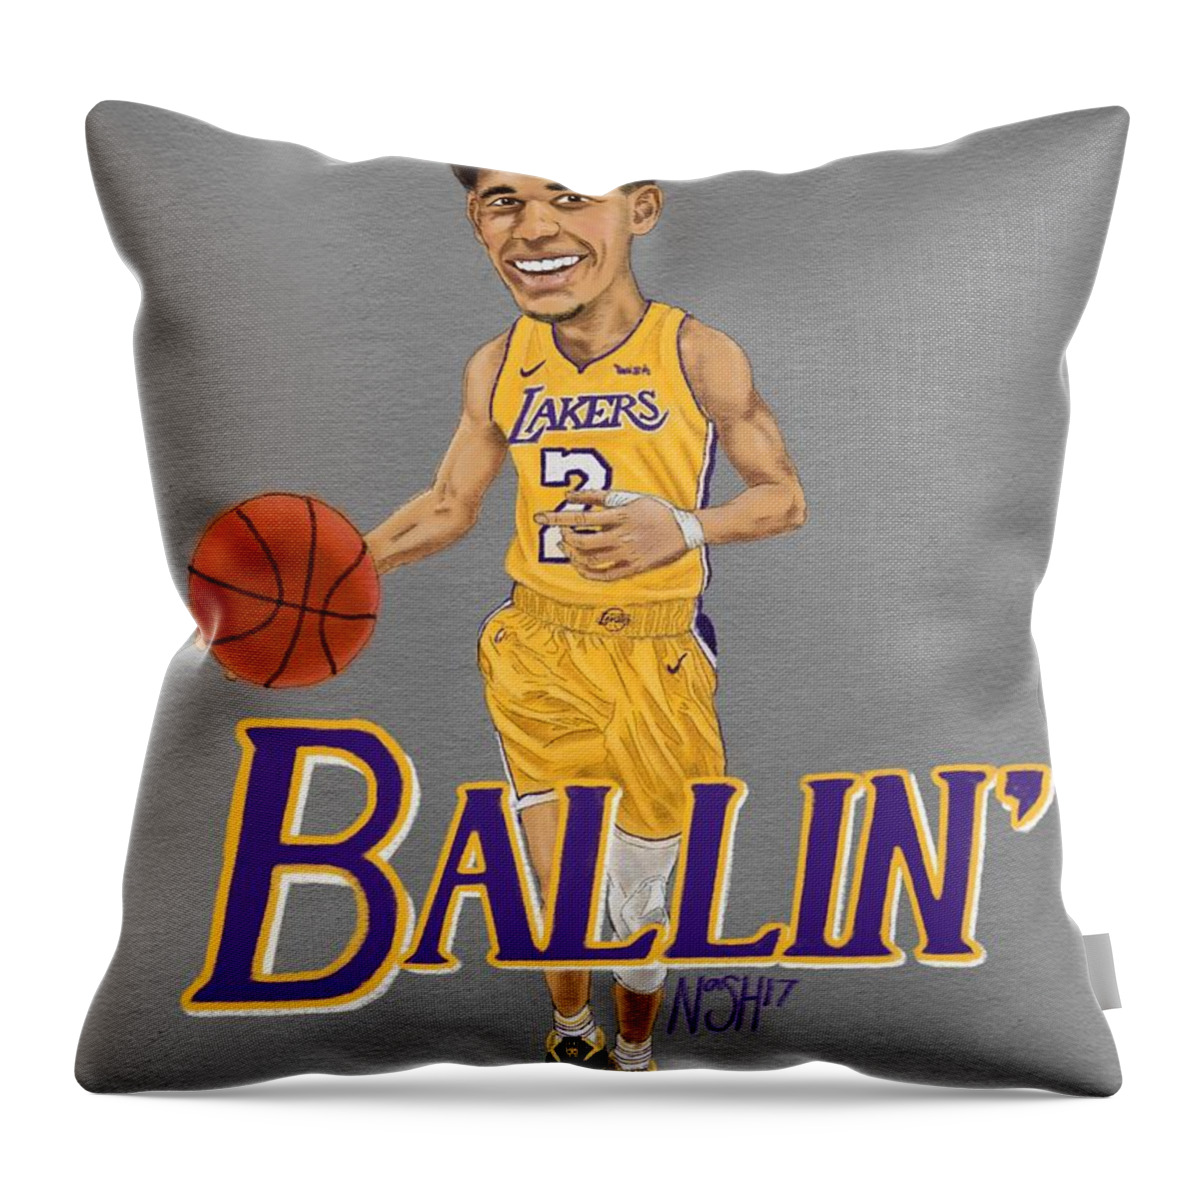 Nba Throw Pillow featuring the drawing Ballin' by Jeremy Nash